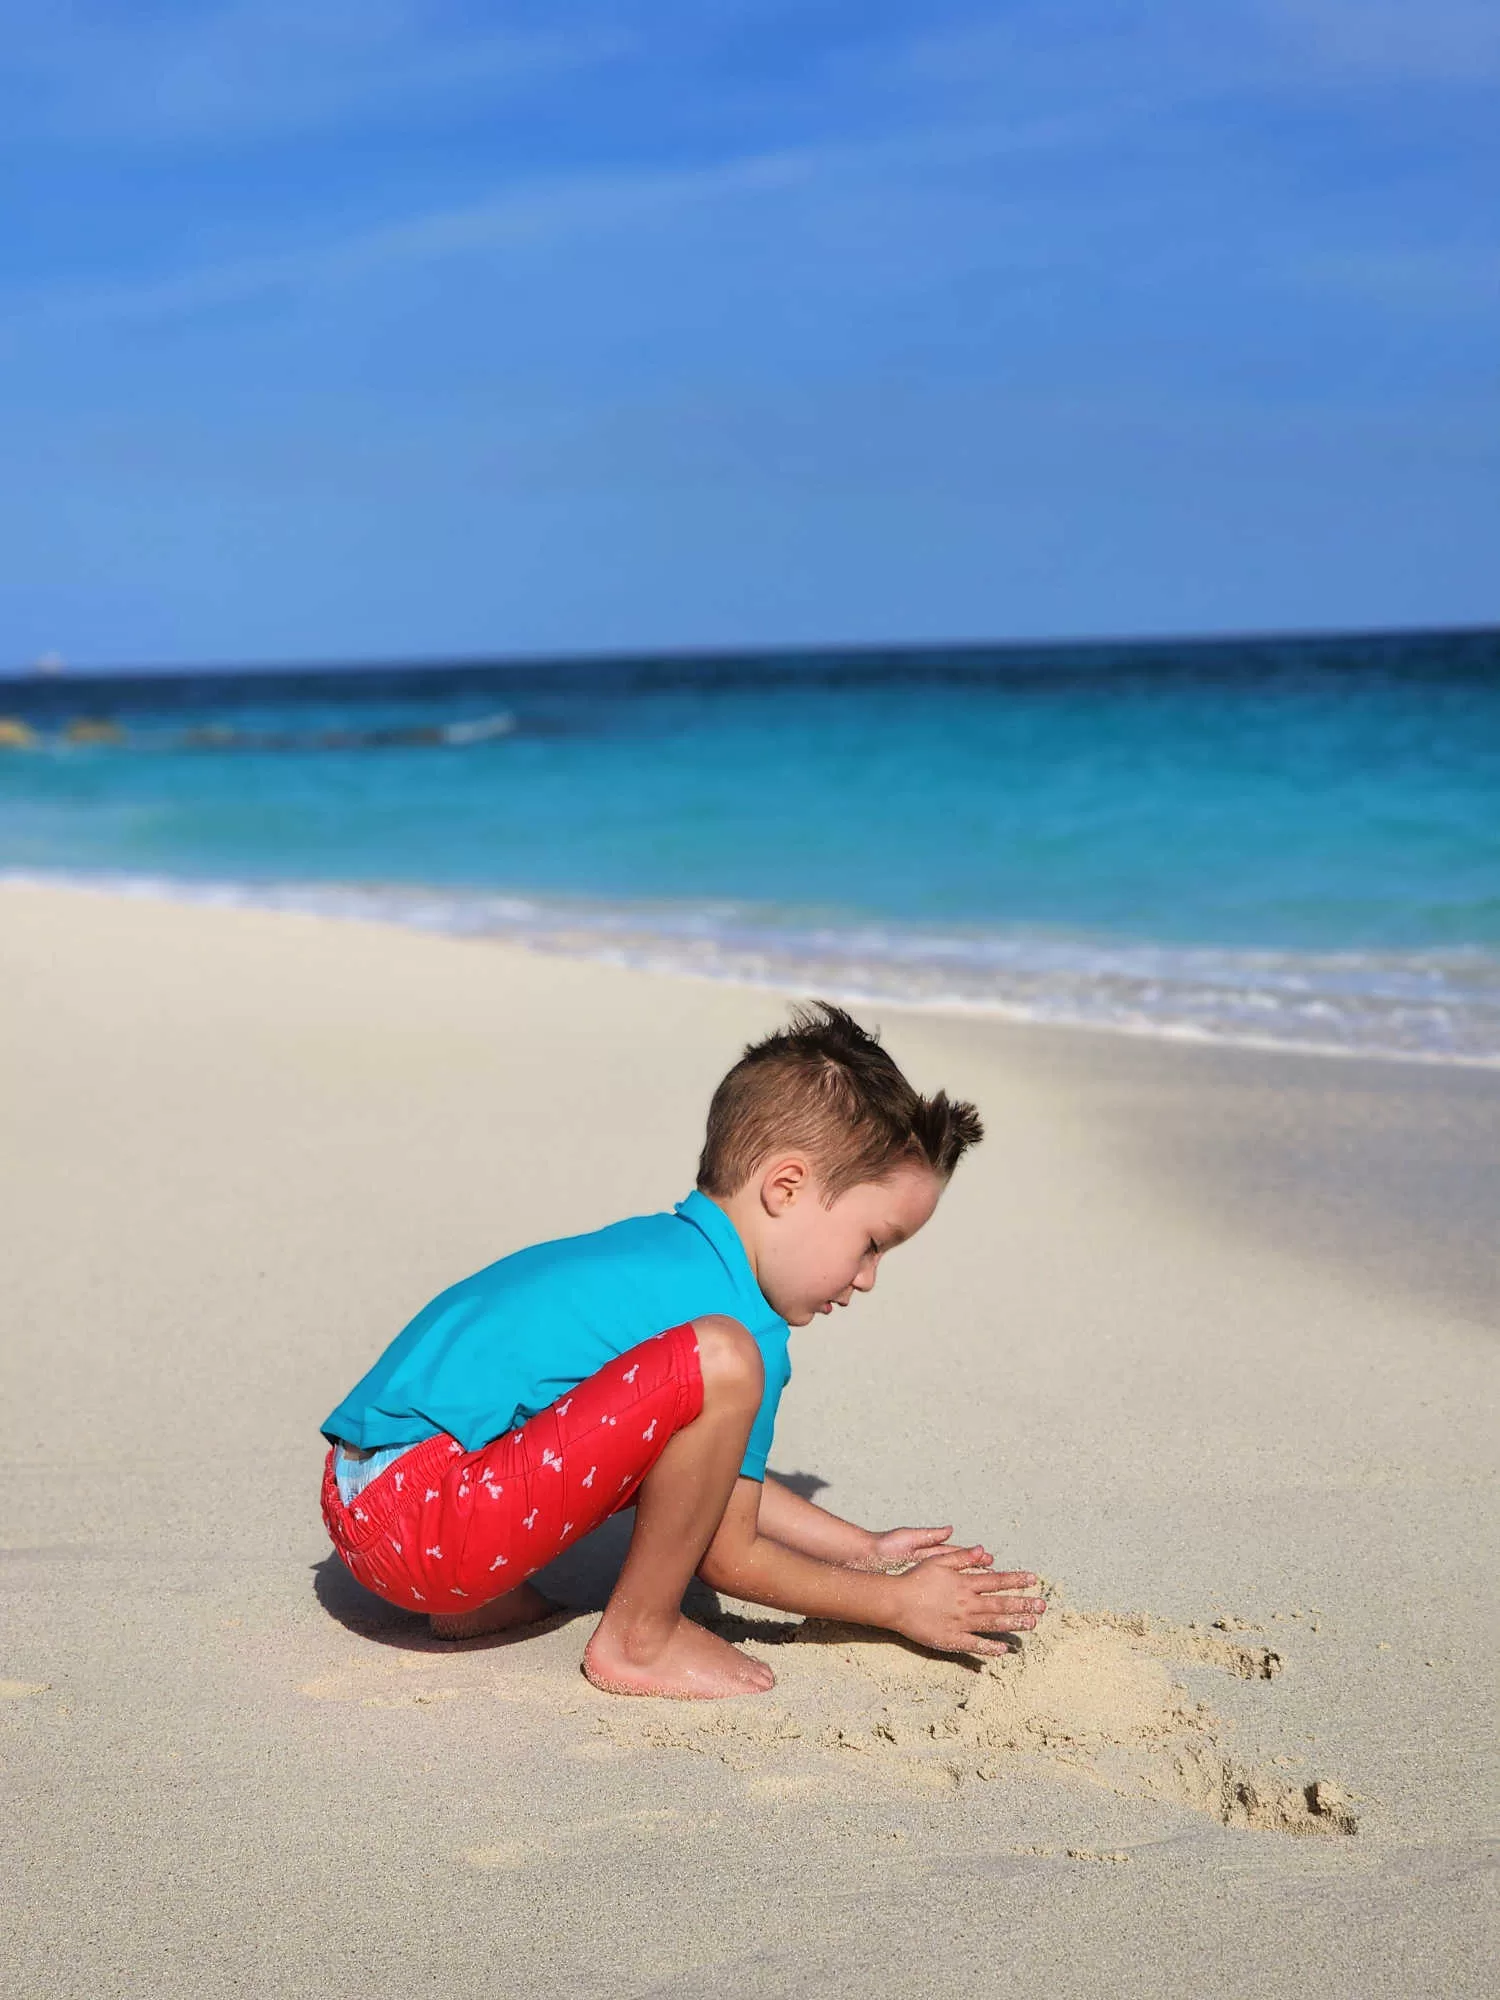 A four year old boy plays in the sand in the Bahamas. He is wearing red swim suit with a blue rash guard.